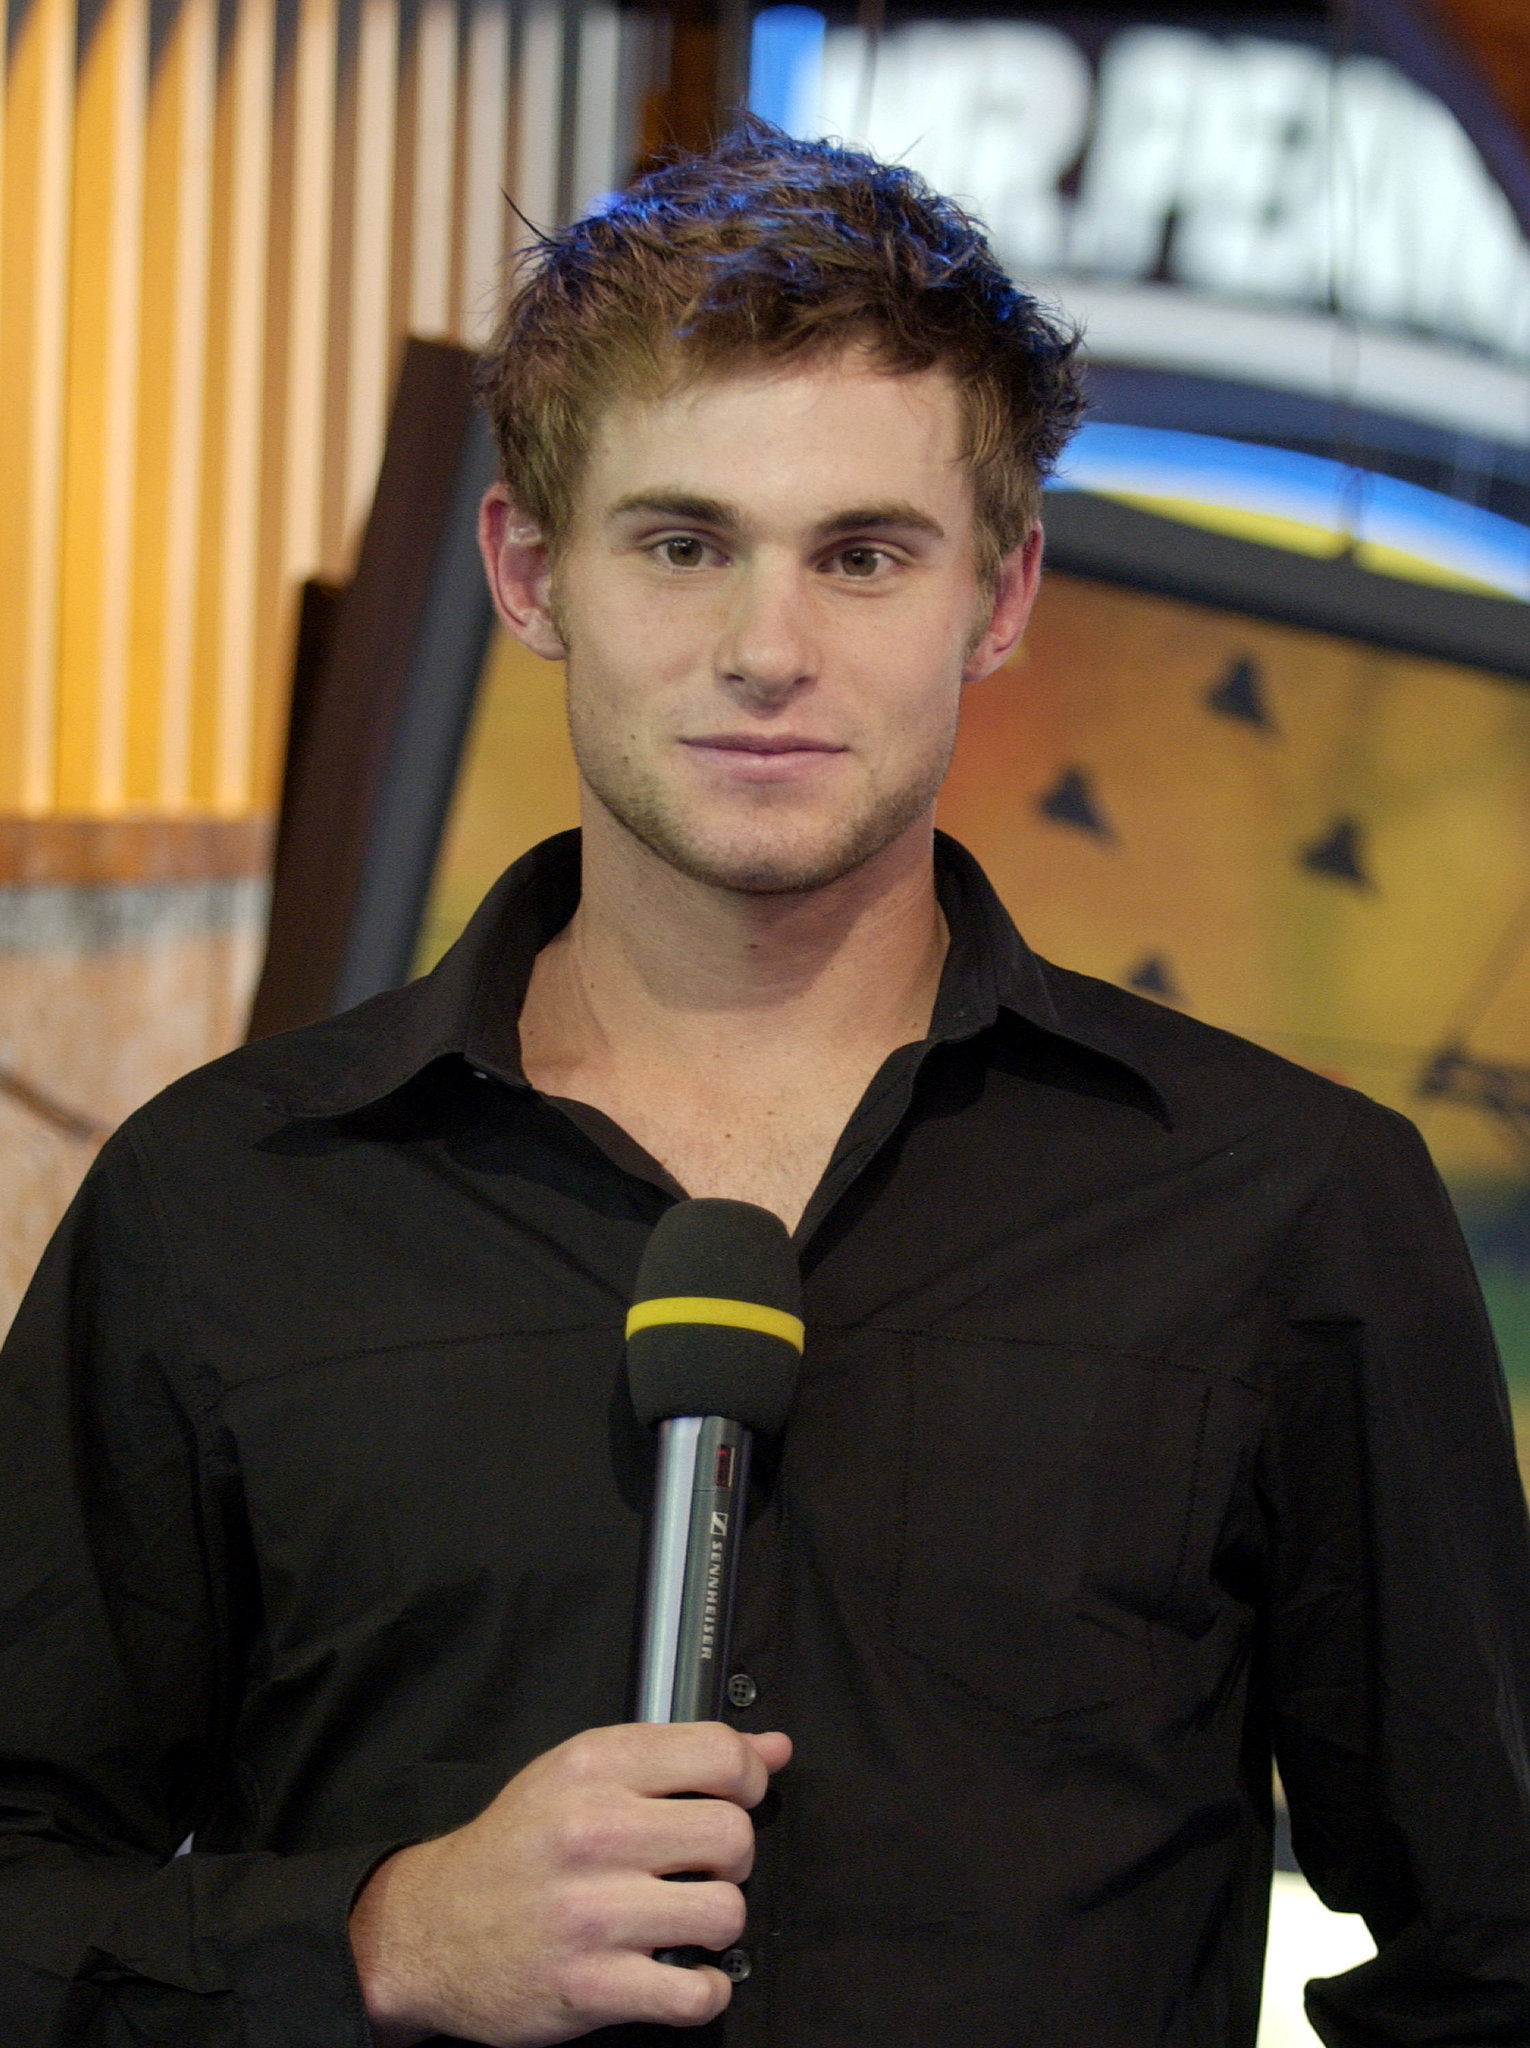 Tennis Player Andy Roddick Was On The Show In 2003 The Ultimate Trl 